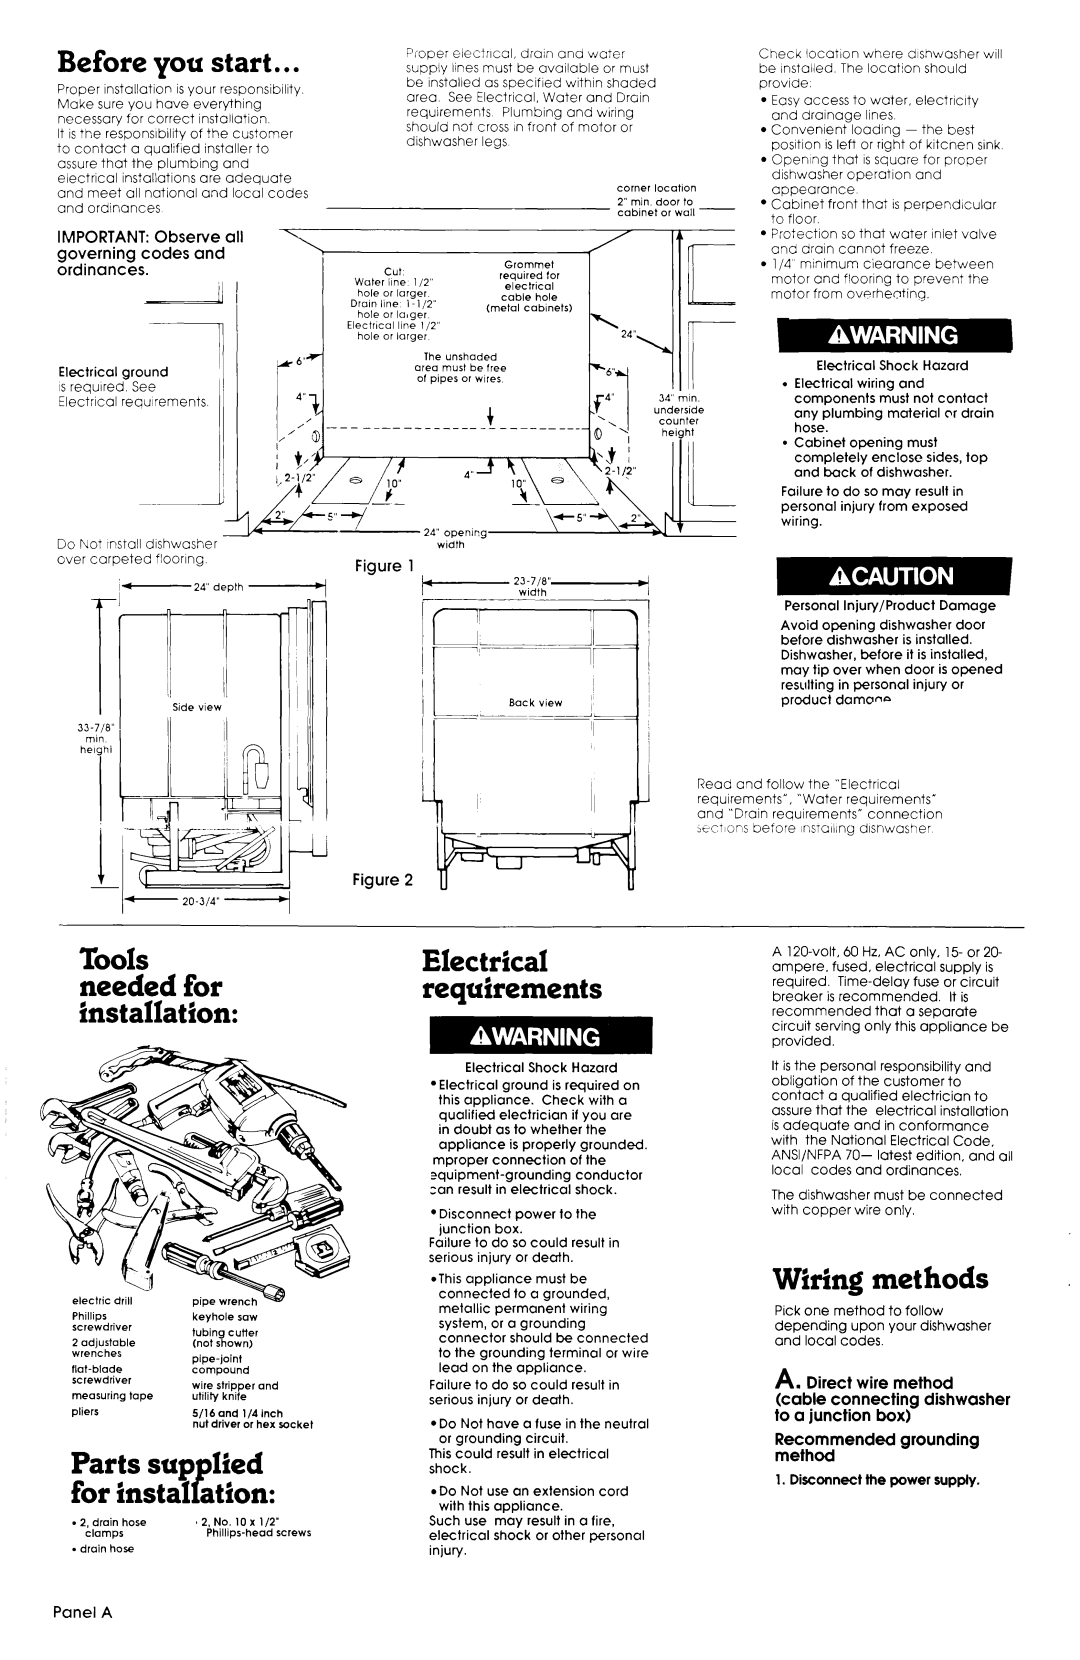 Whirlpool 3369089 Before you start, Wiring methods, Tools needed for installation, Electrical requirements, Panel A 